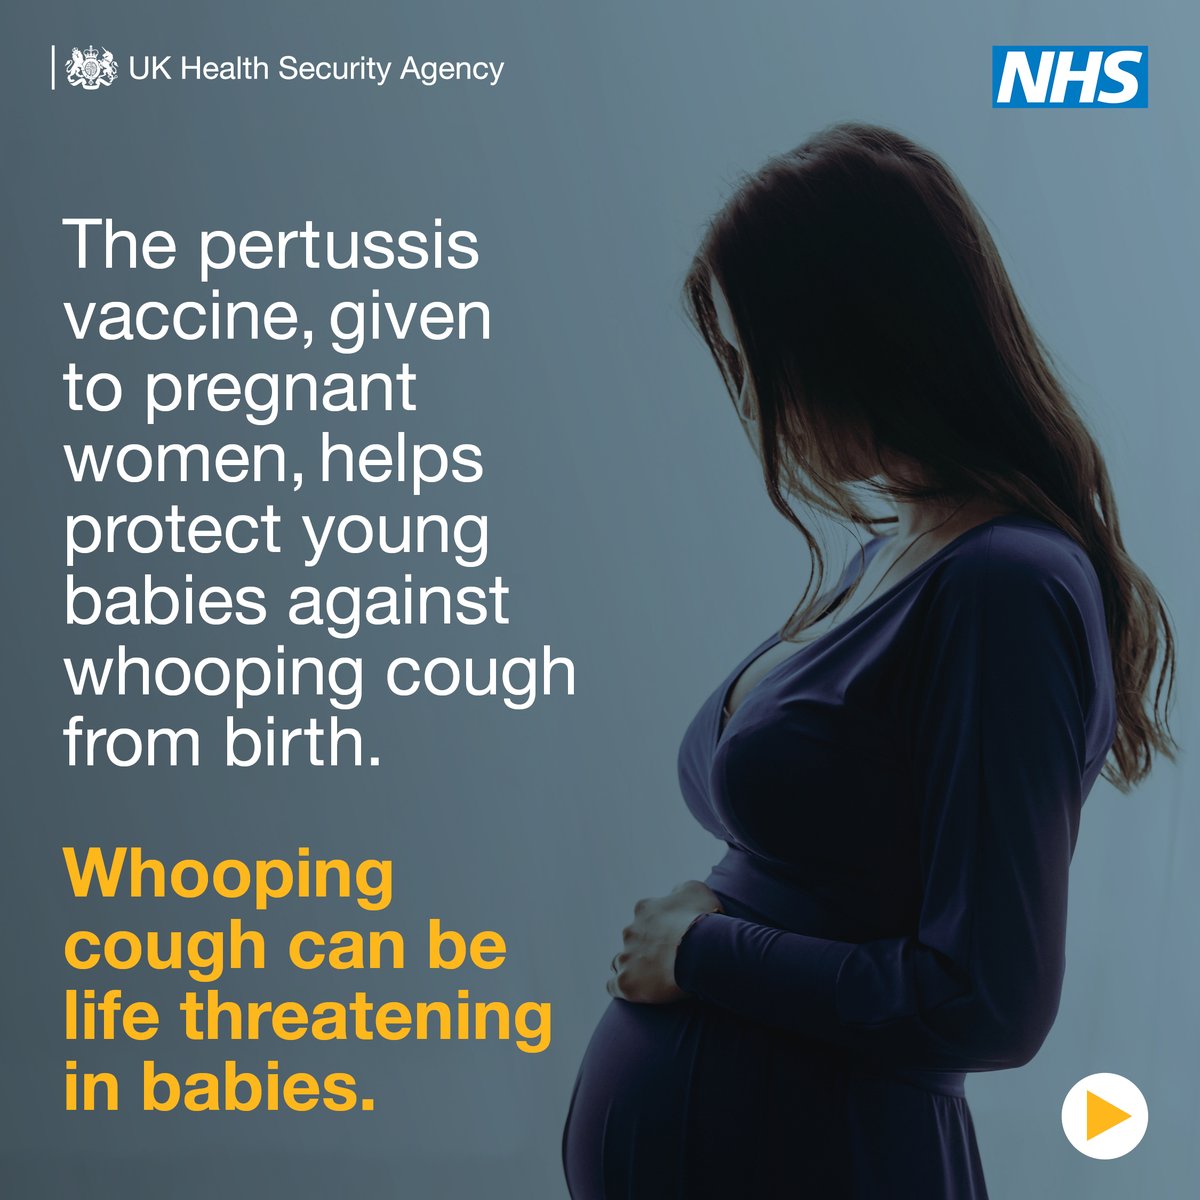 If you're pregnant, it's important to take up the #Pertussis vaccine when offered. It helps to protect your baby in their first few weeks of life, as #WhoopingCough can be life-threatening & require hospital treatment. More info:orlo.uk/FY2lF